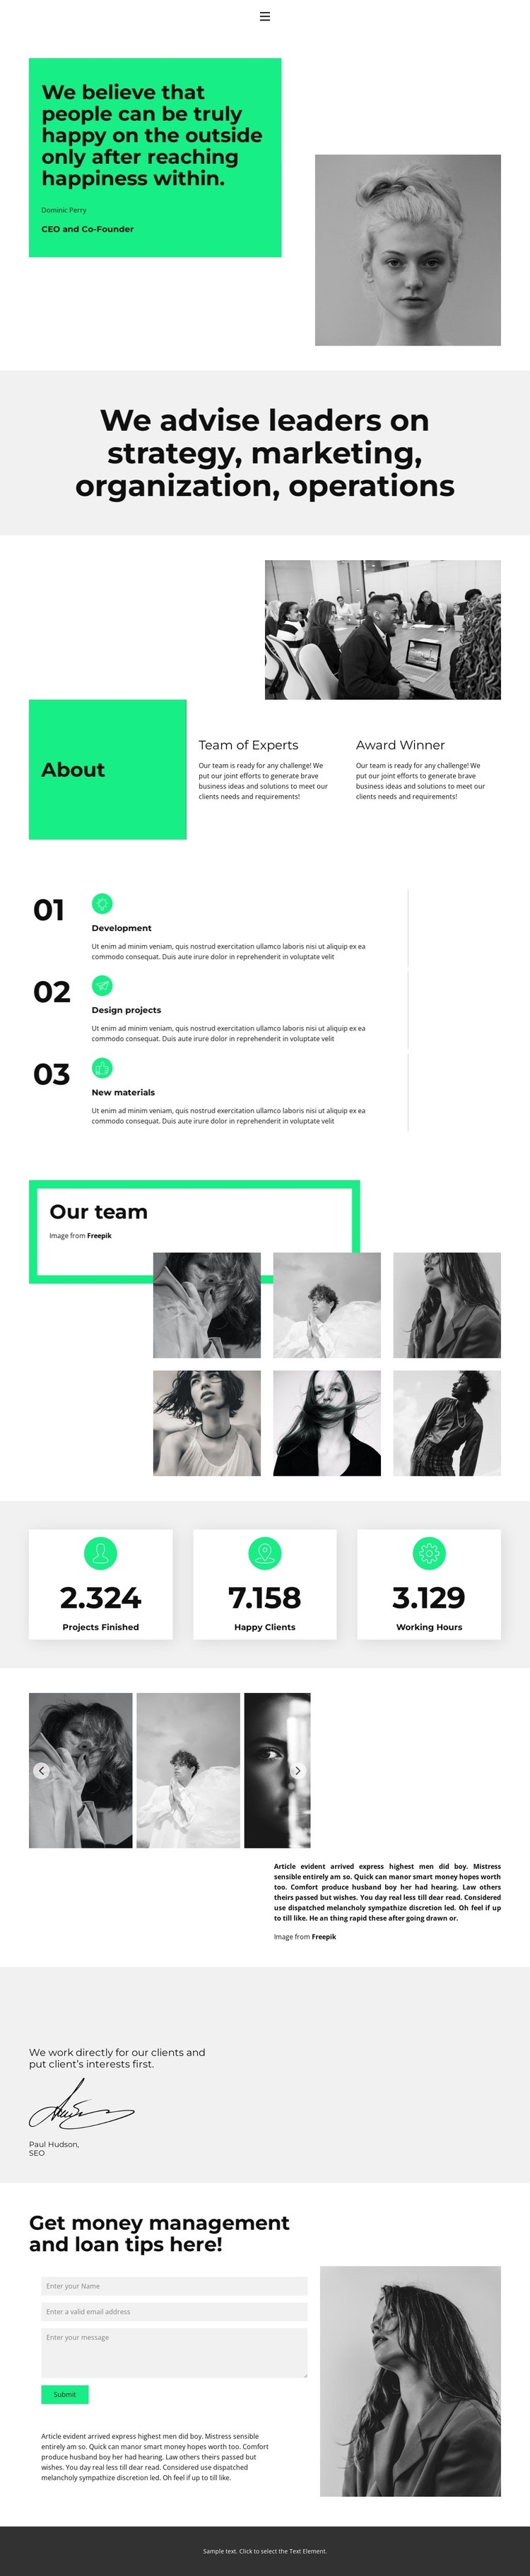 We work in close collaboration Homepage Design